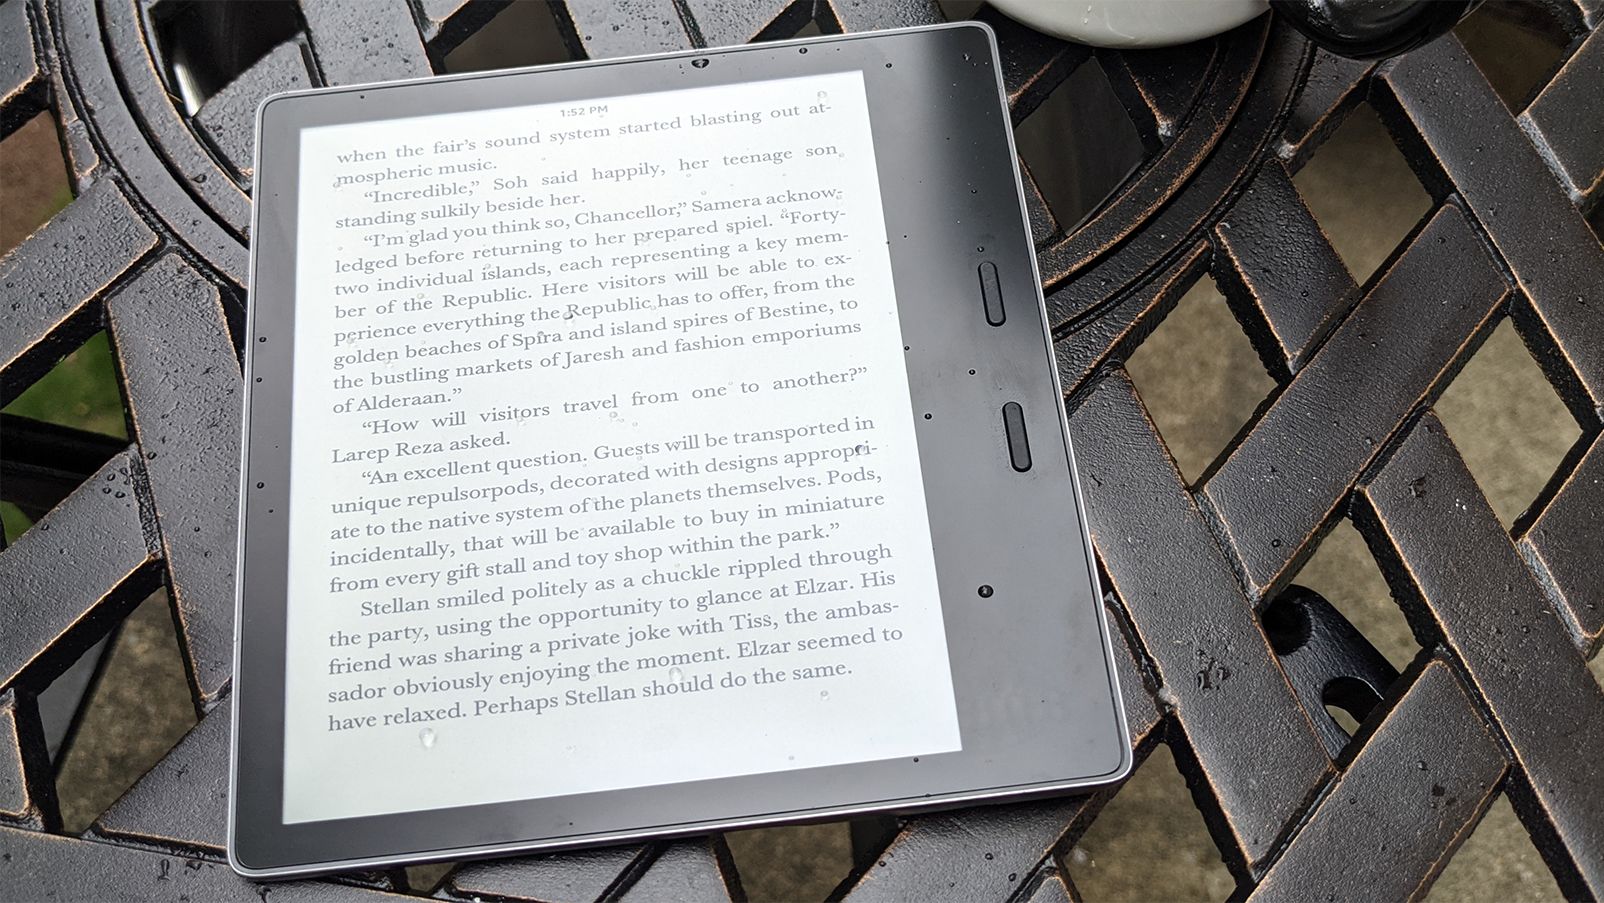 Best eBook Reader 2023 - Which e-Reader to use in 2024? 